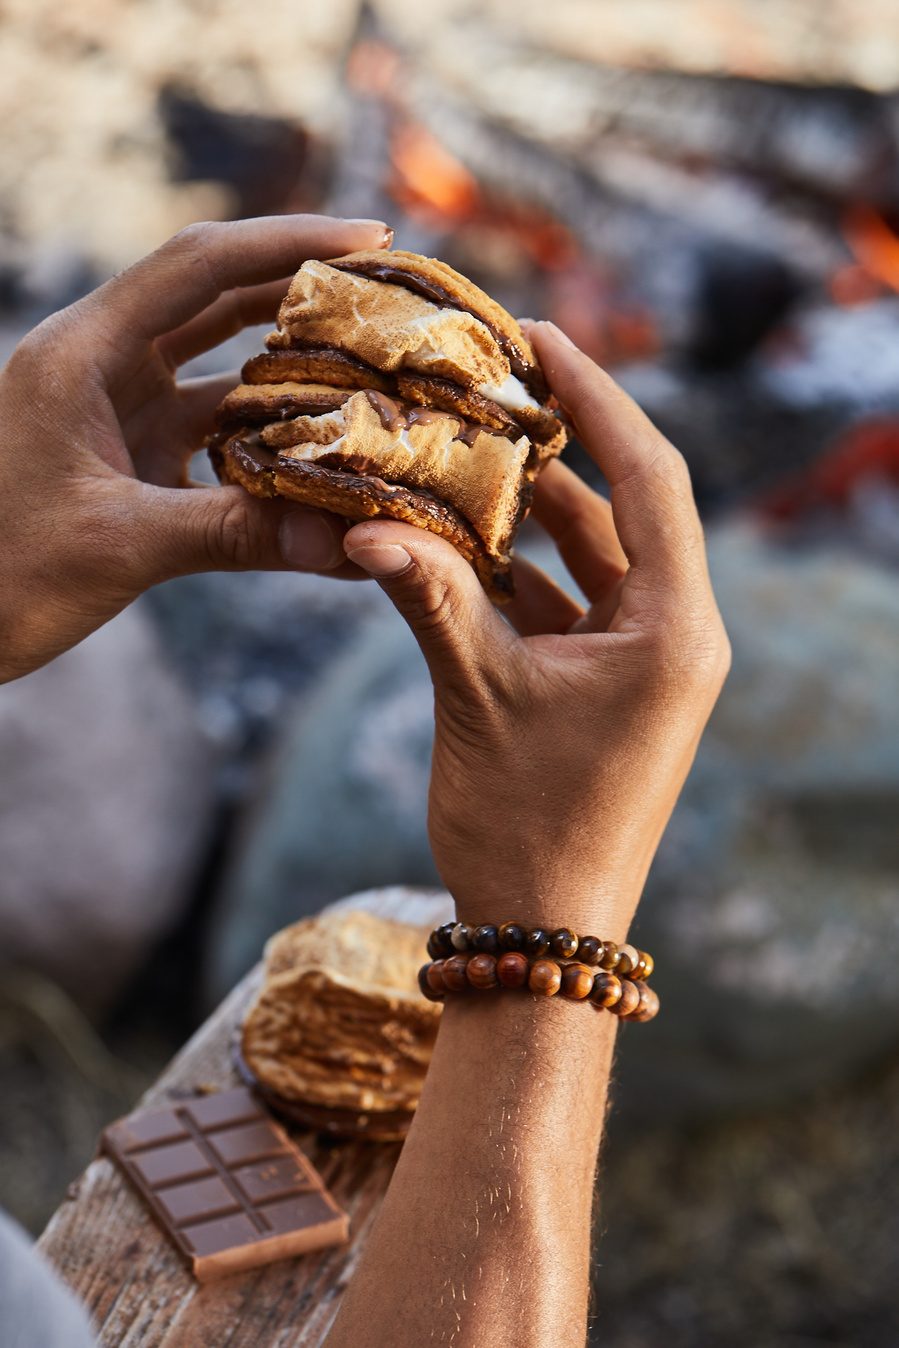 A man's hands hold a large smore in front of an outdoor fire pit. Lifestyle food photography for The Buckle